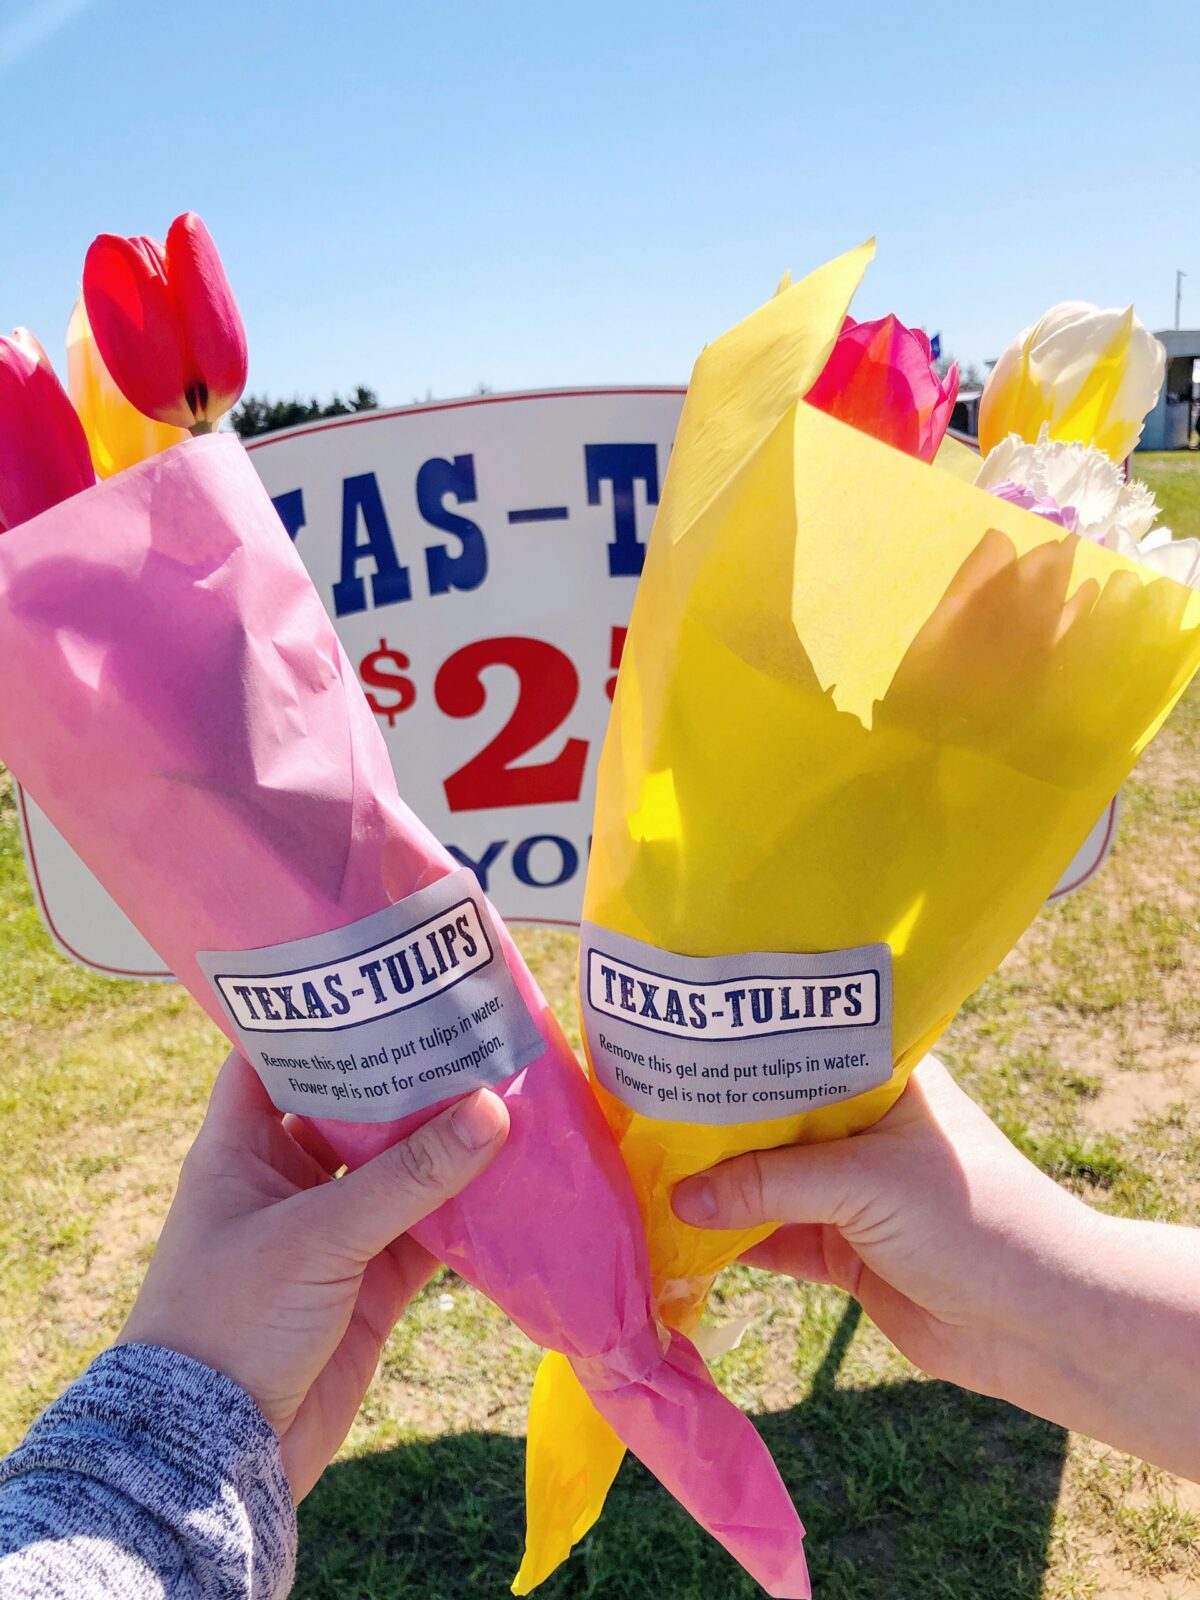 Looking for a fun and affordable outdoor activity for all ages? Travel about an hour north of Dallas, to visit Texas-Tulips!